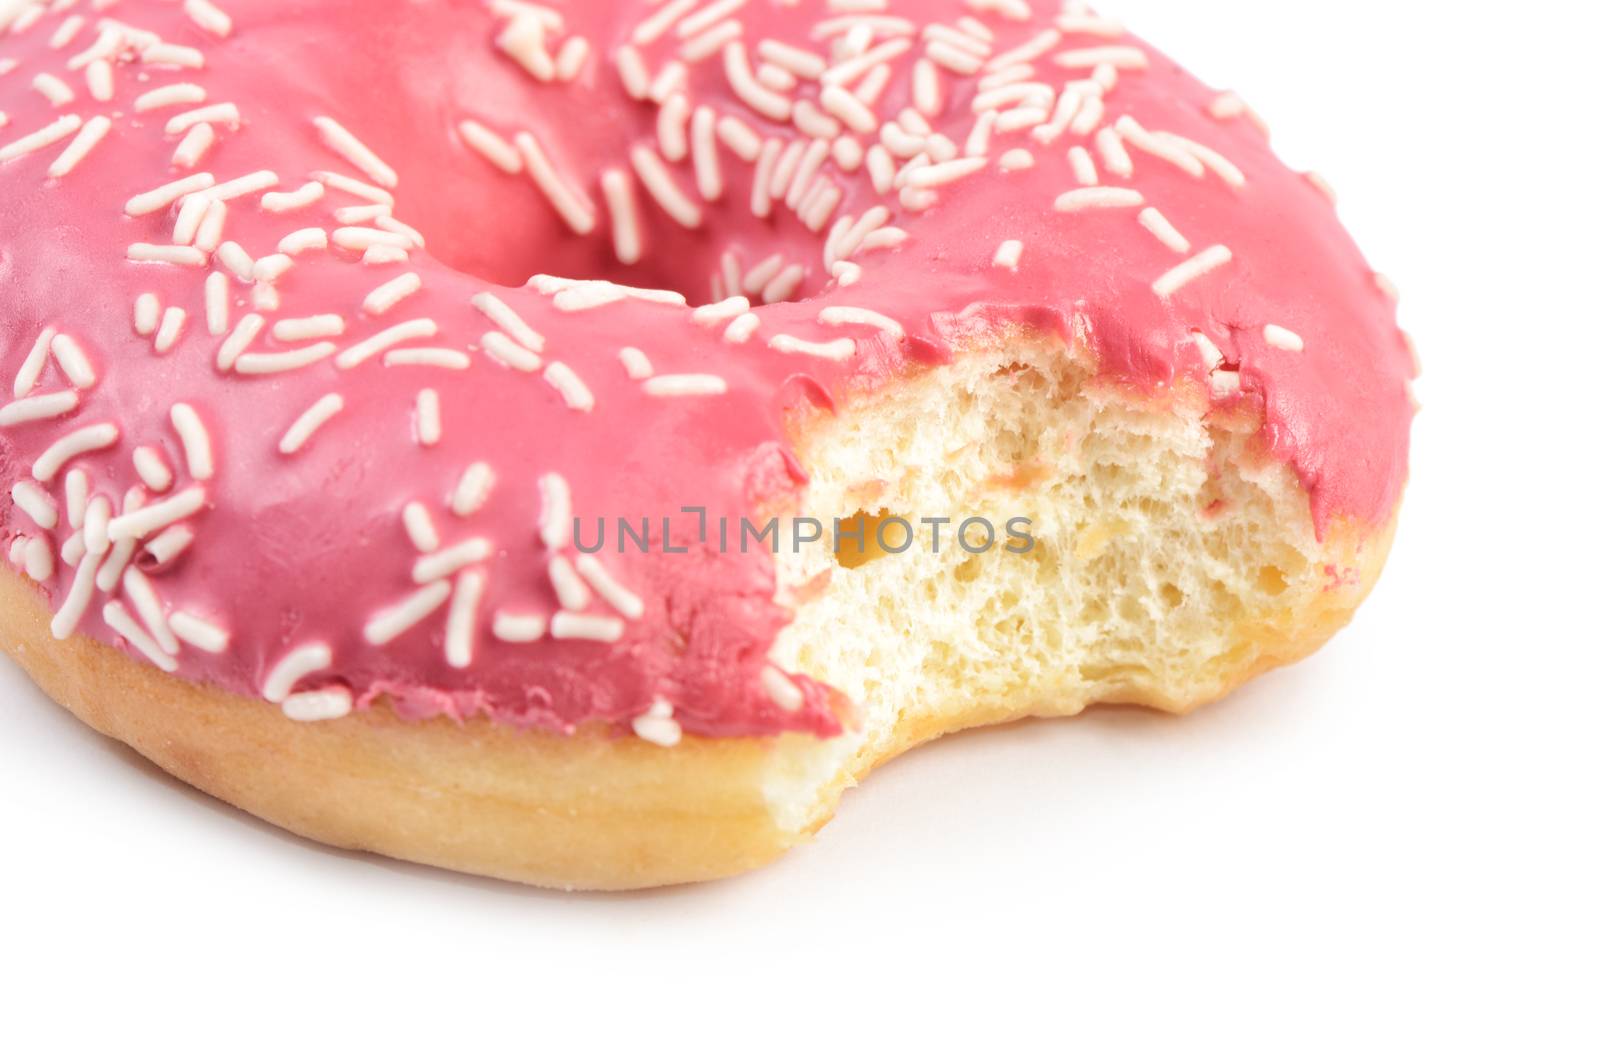 The bitten donut isolated on white background